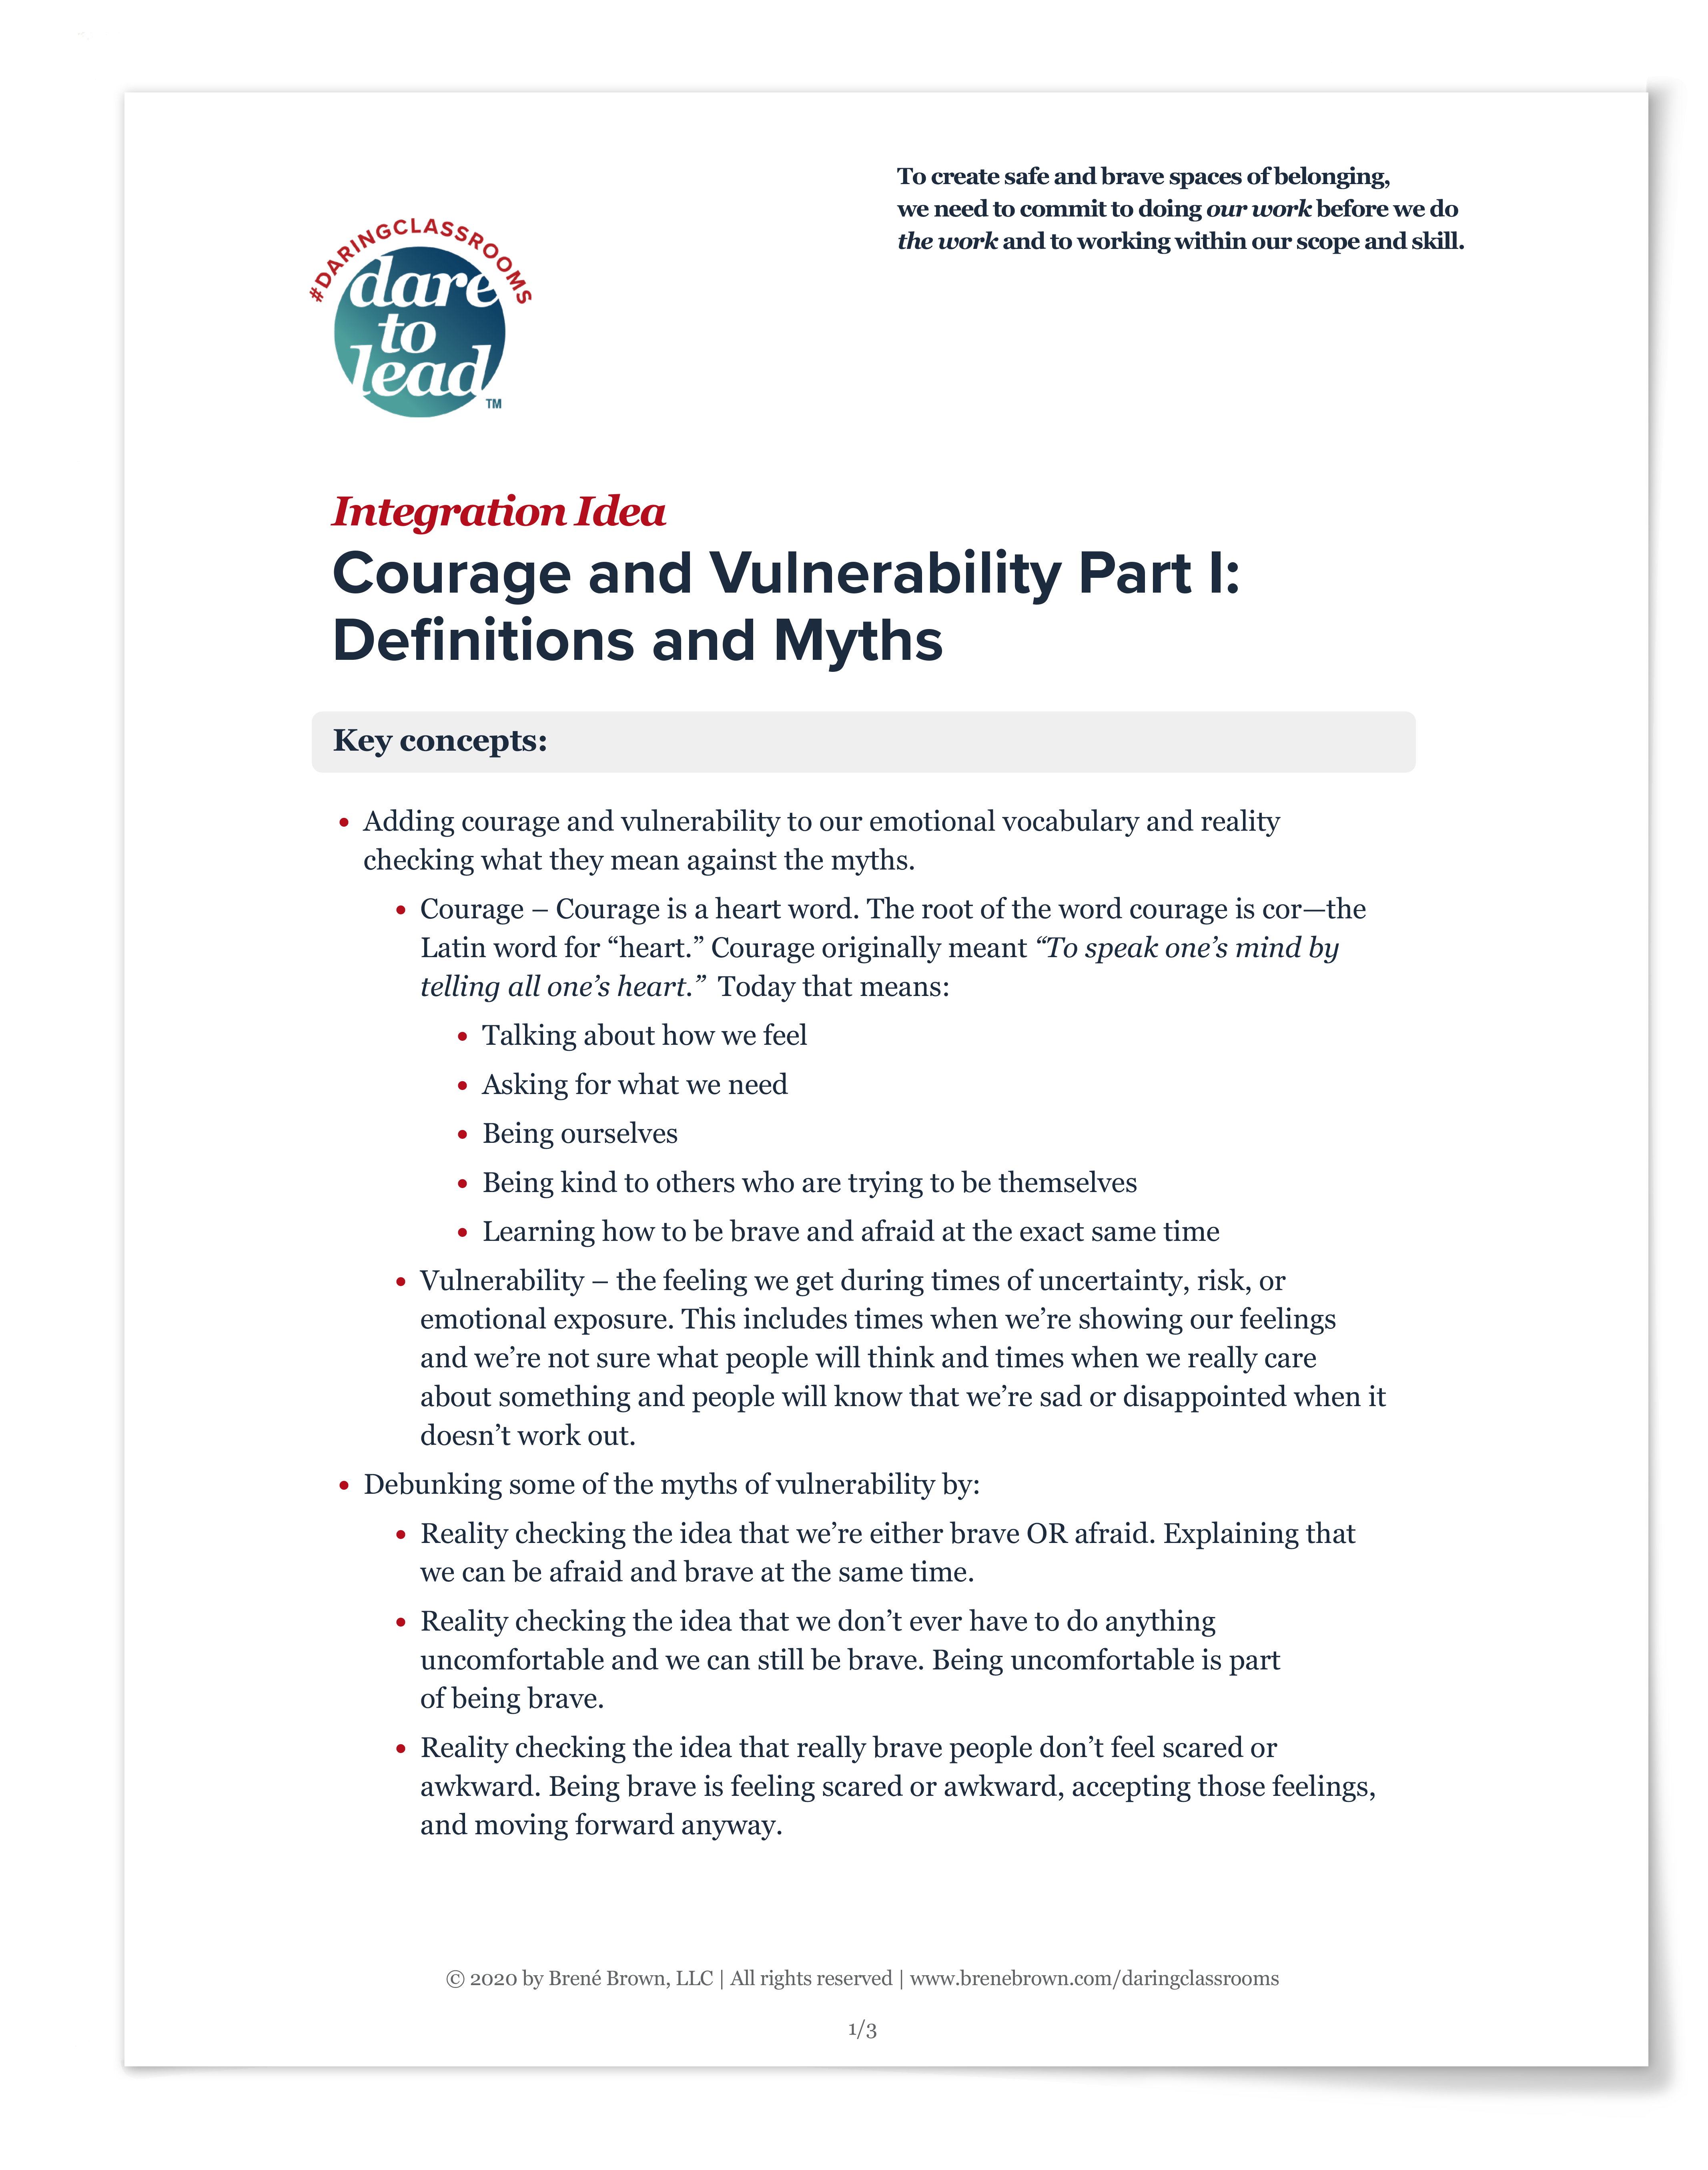 Courage and Vulnerability Part 1: Definitions and Myths for Daring Classrooms